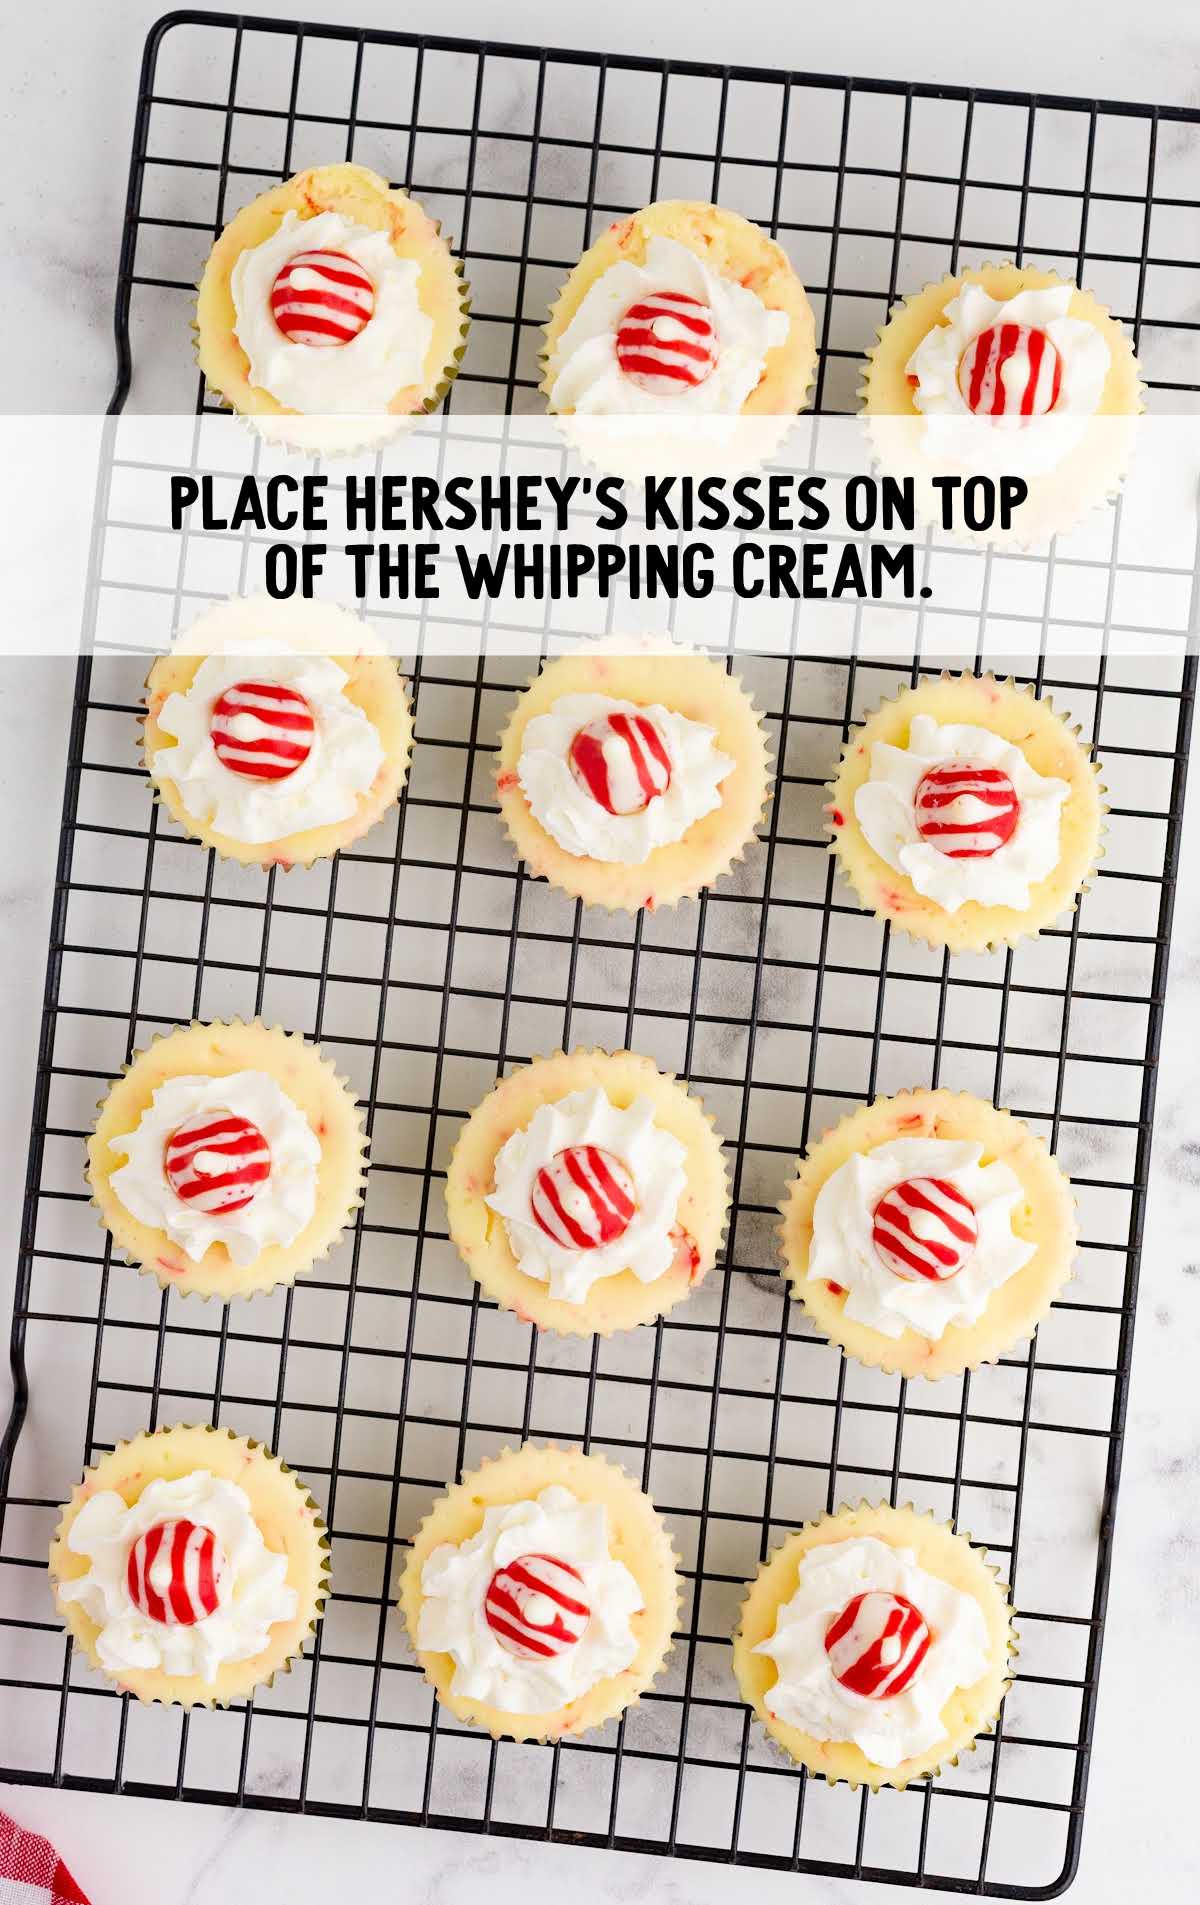 Hershey's kisses placed on top of the whipping cream